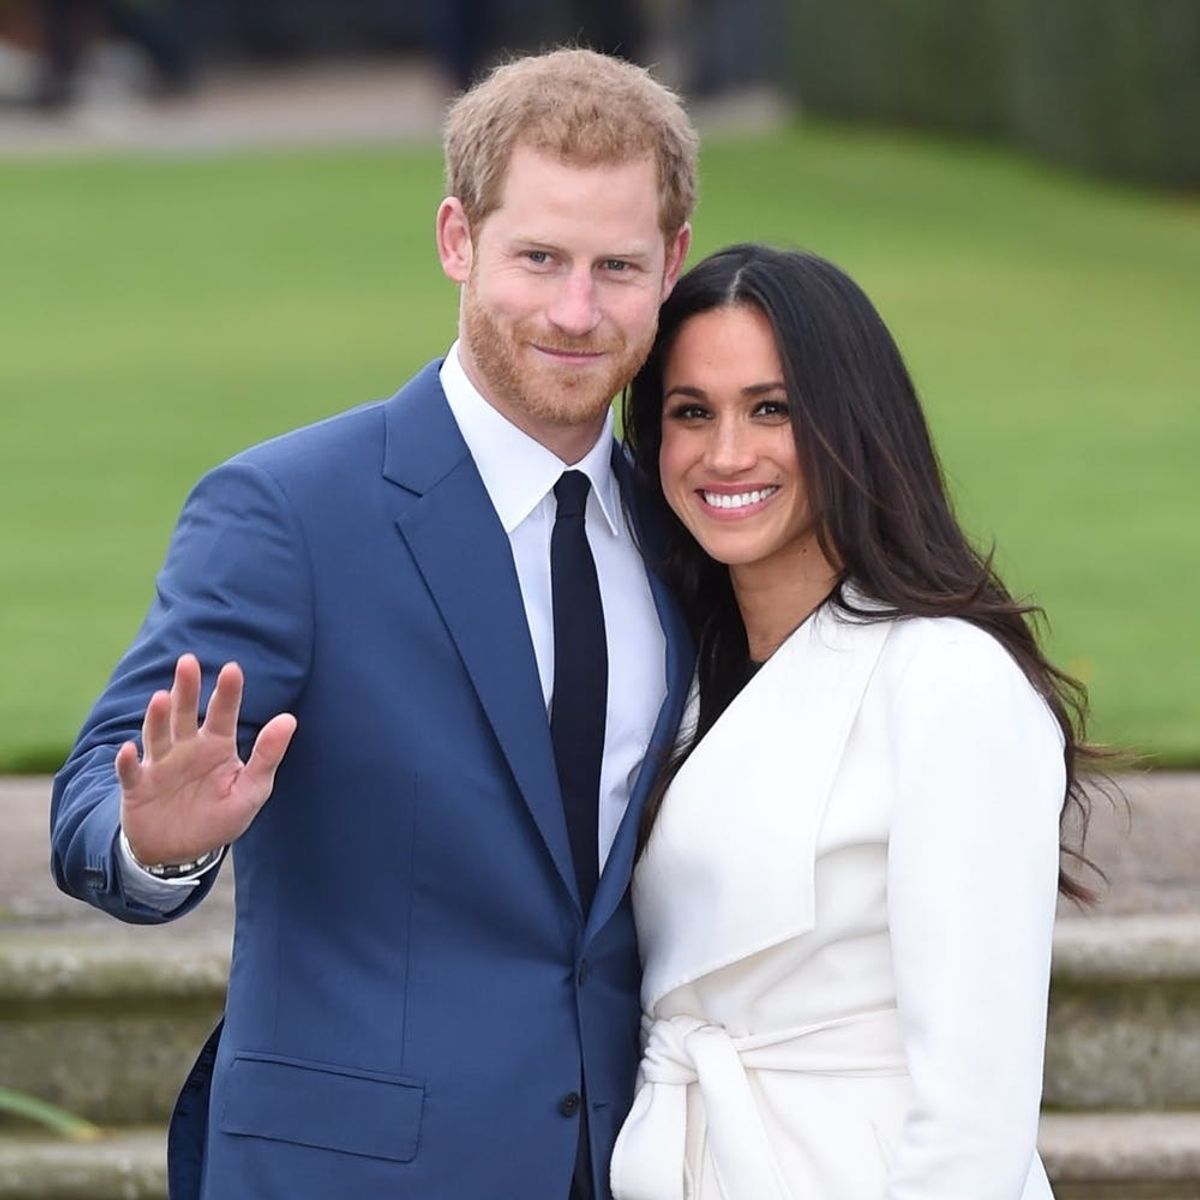 Prince Harry and Meghan Markle’s Story About Their First Date Is So Sweet